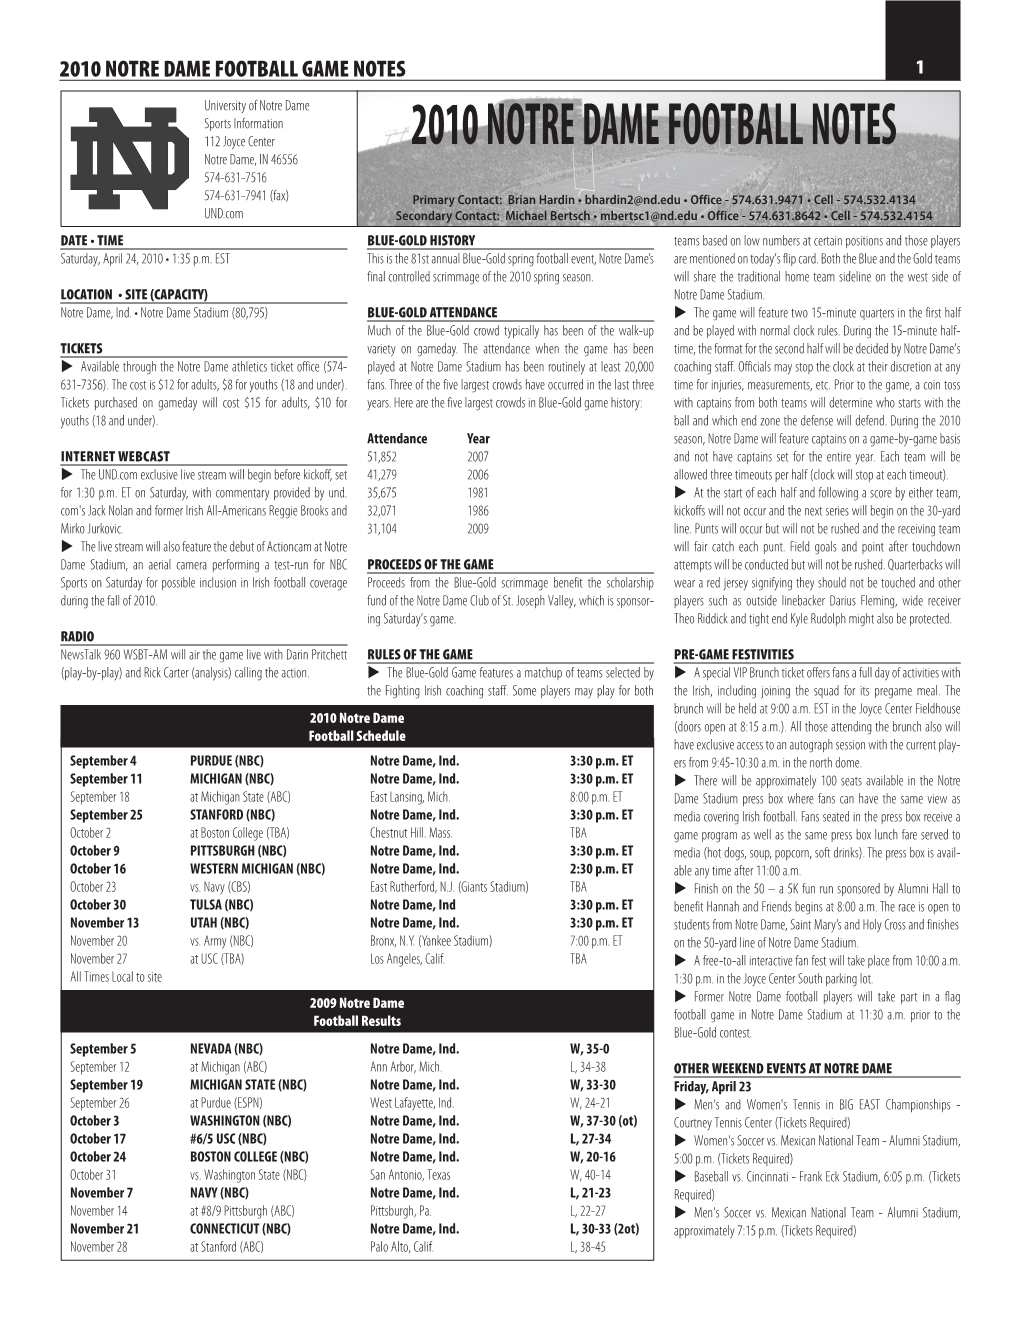 2010 Notre Dame Football Notes